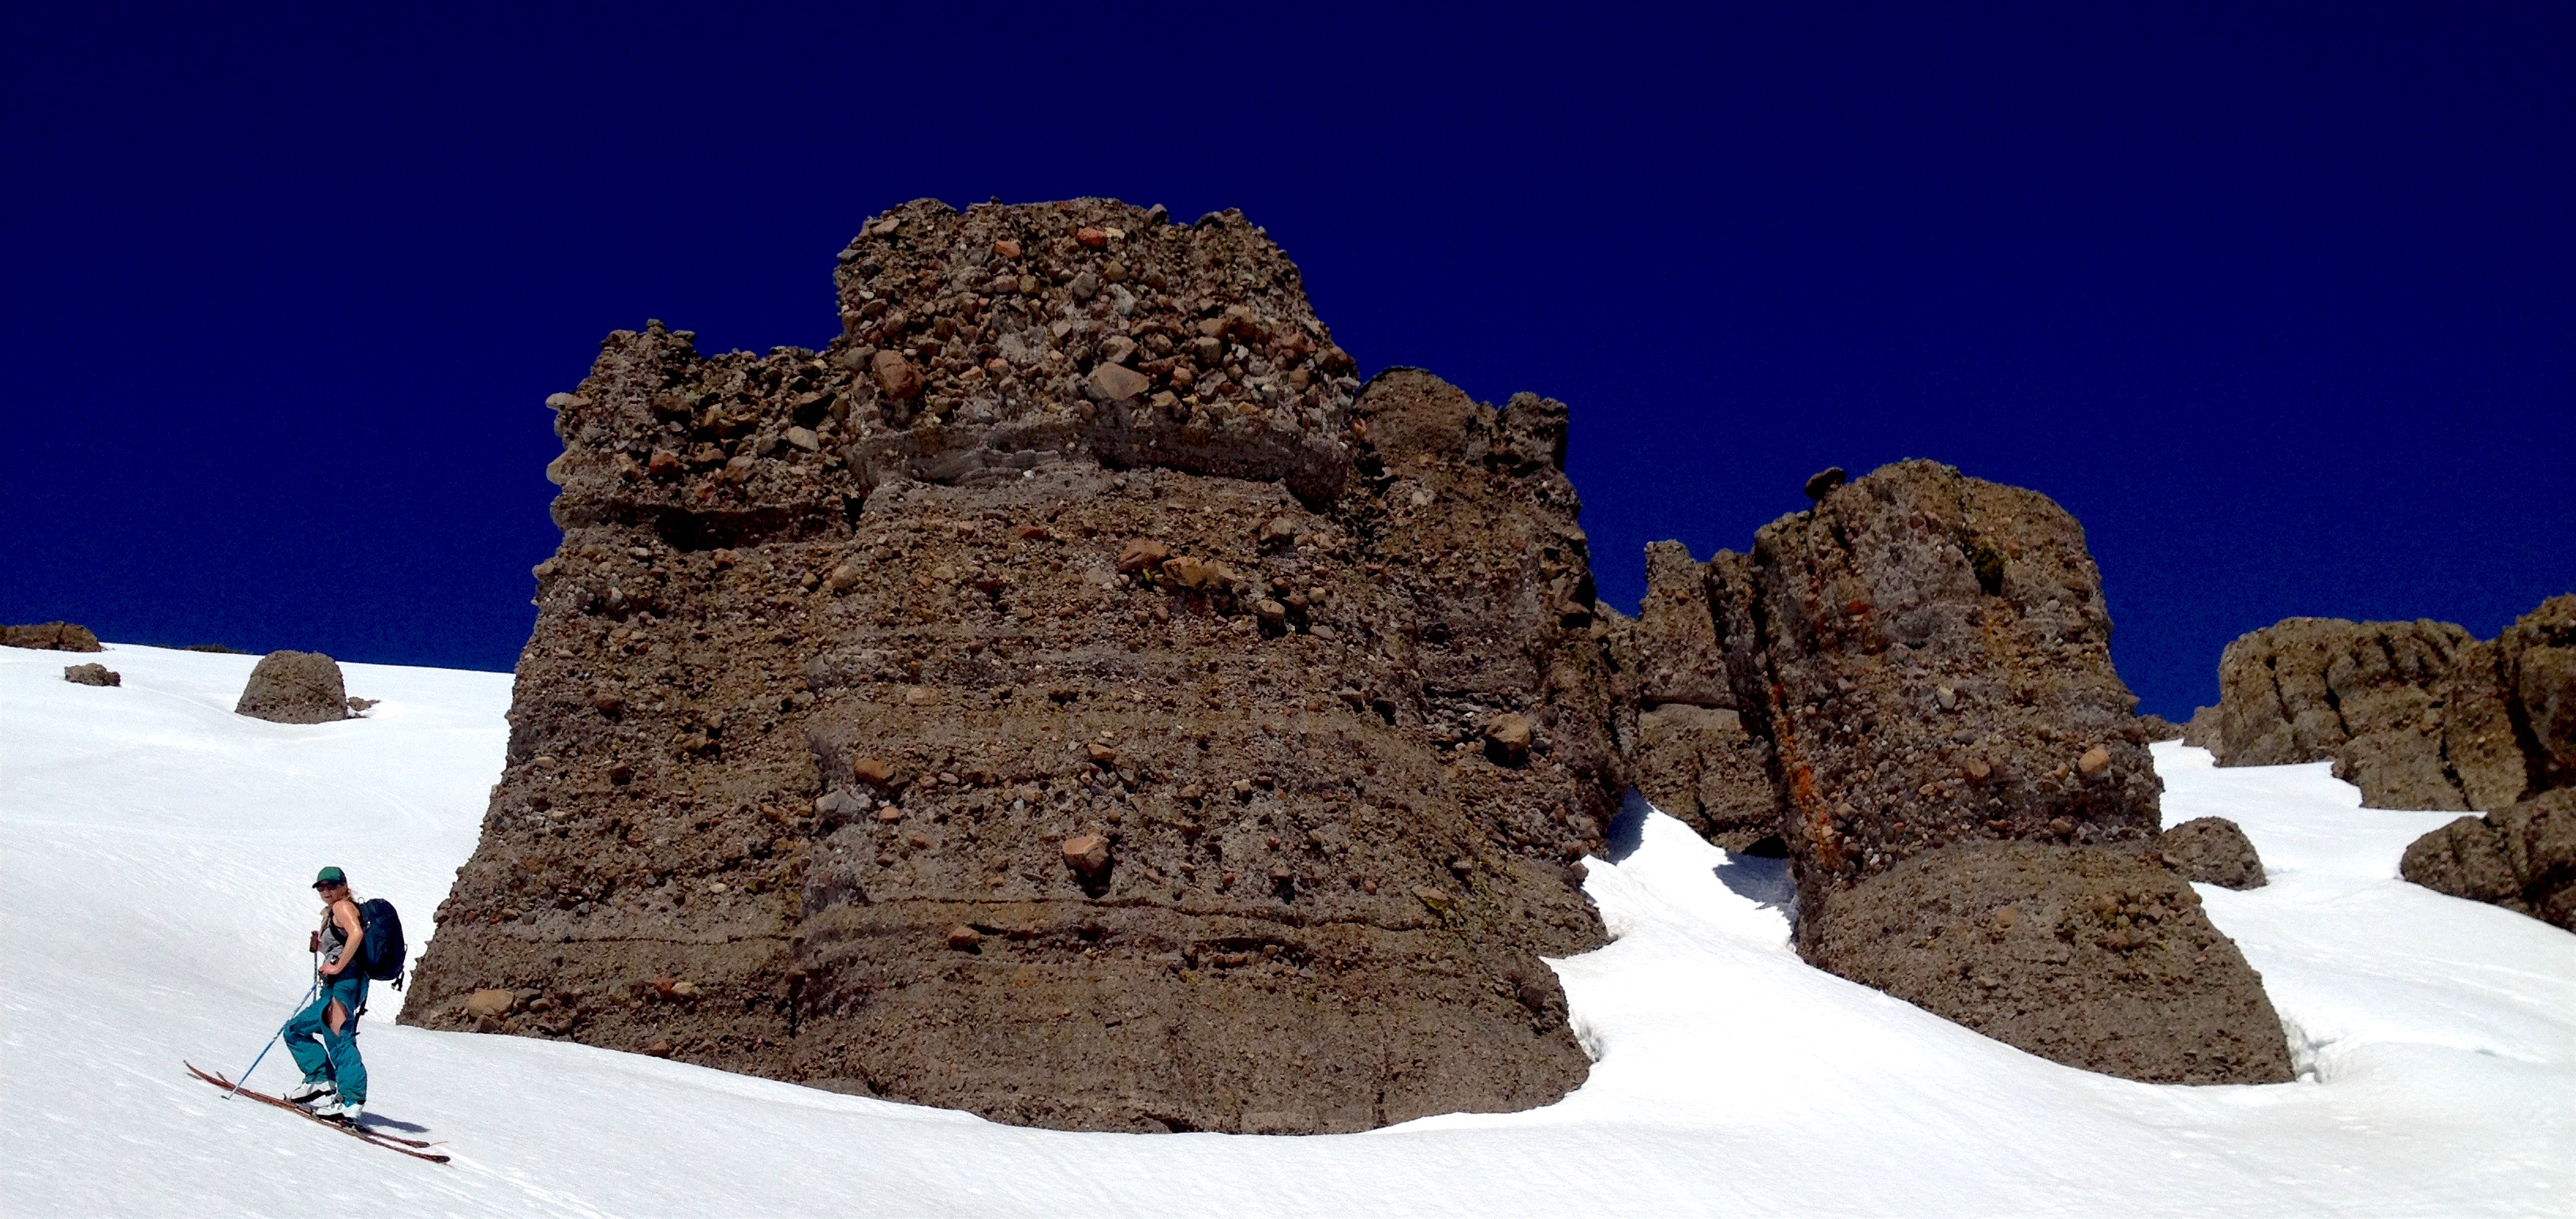 Katy and bizarre rock formations today. photo: miles clark/snowbrains